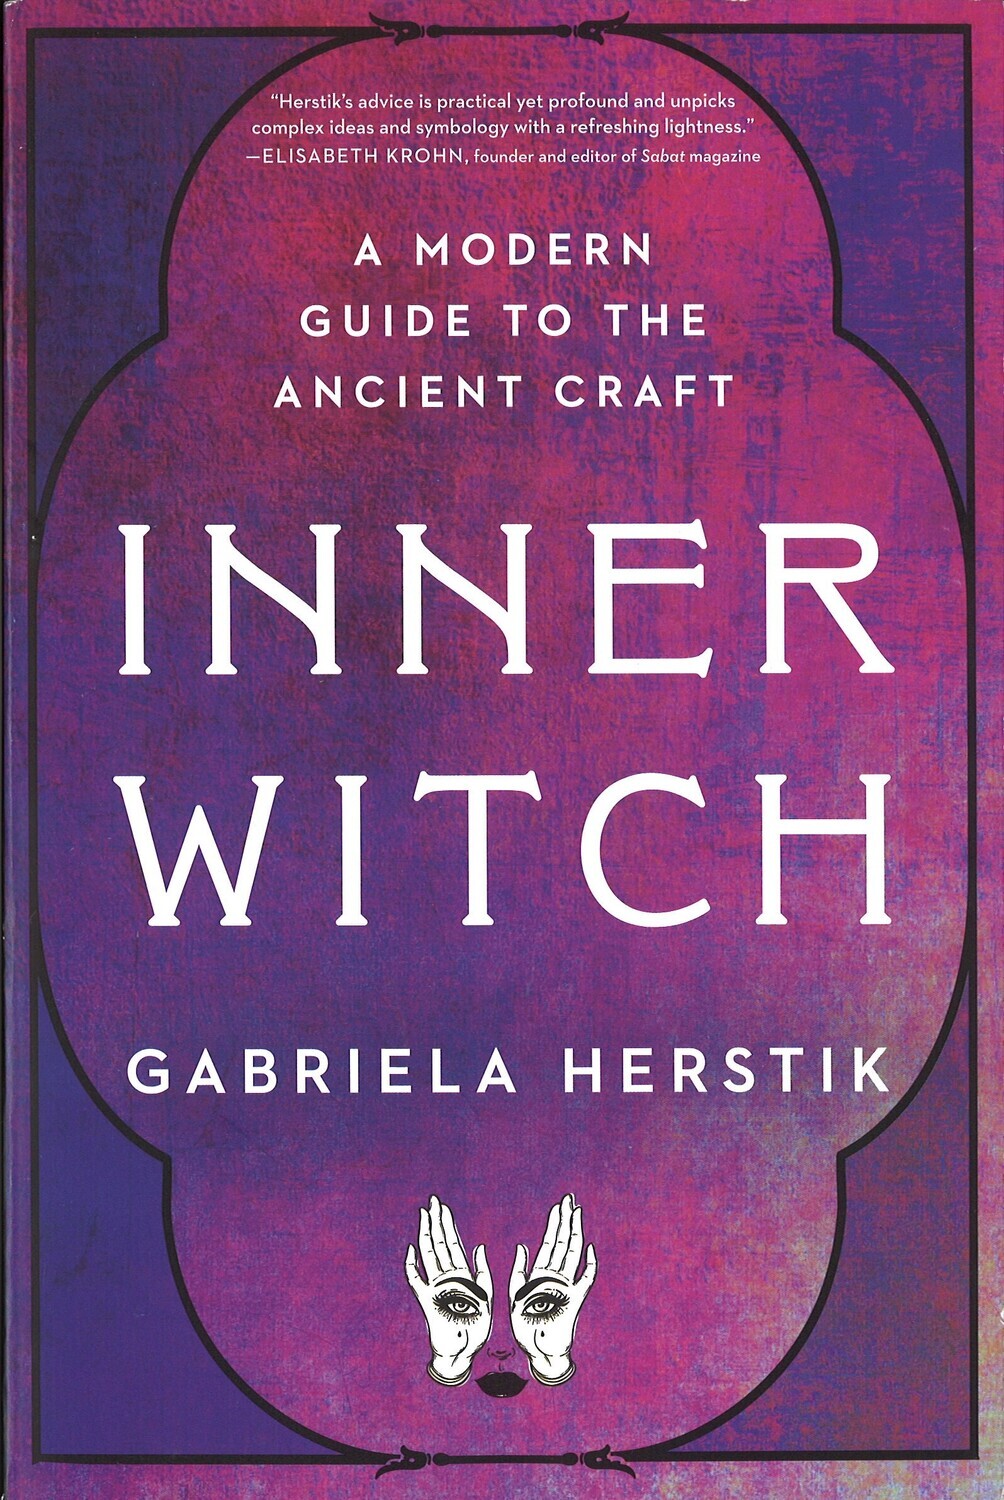 Inner Witch: A Modern Guide to the Ancient Craft